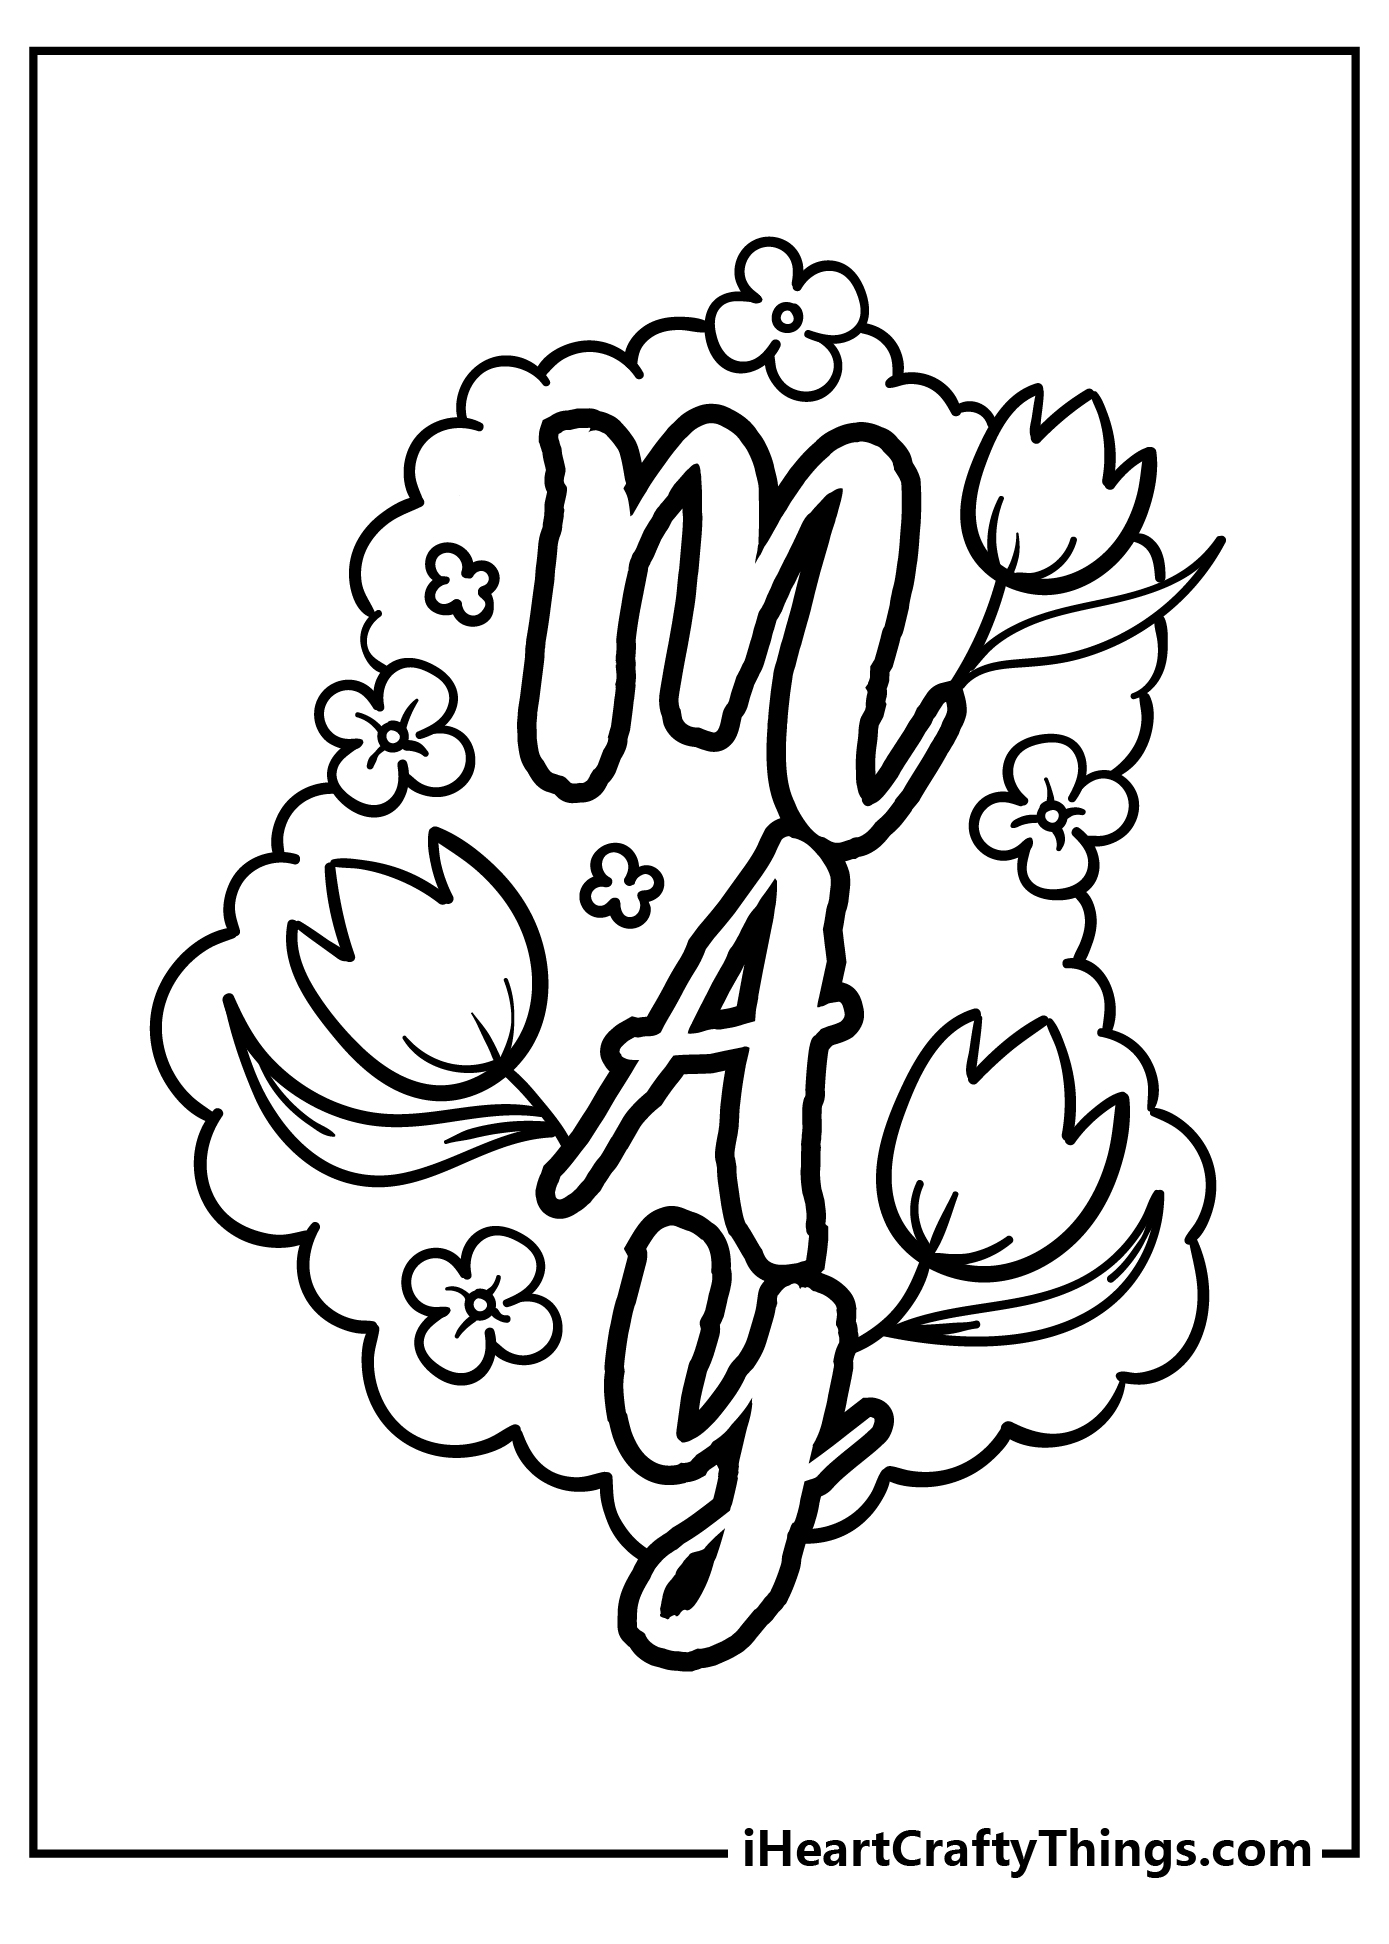 May Coloring Sheet for children free download